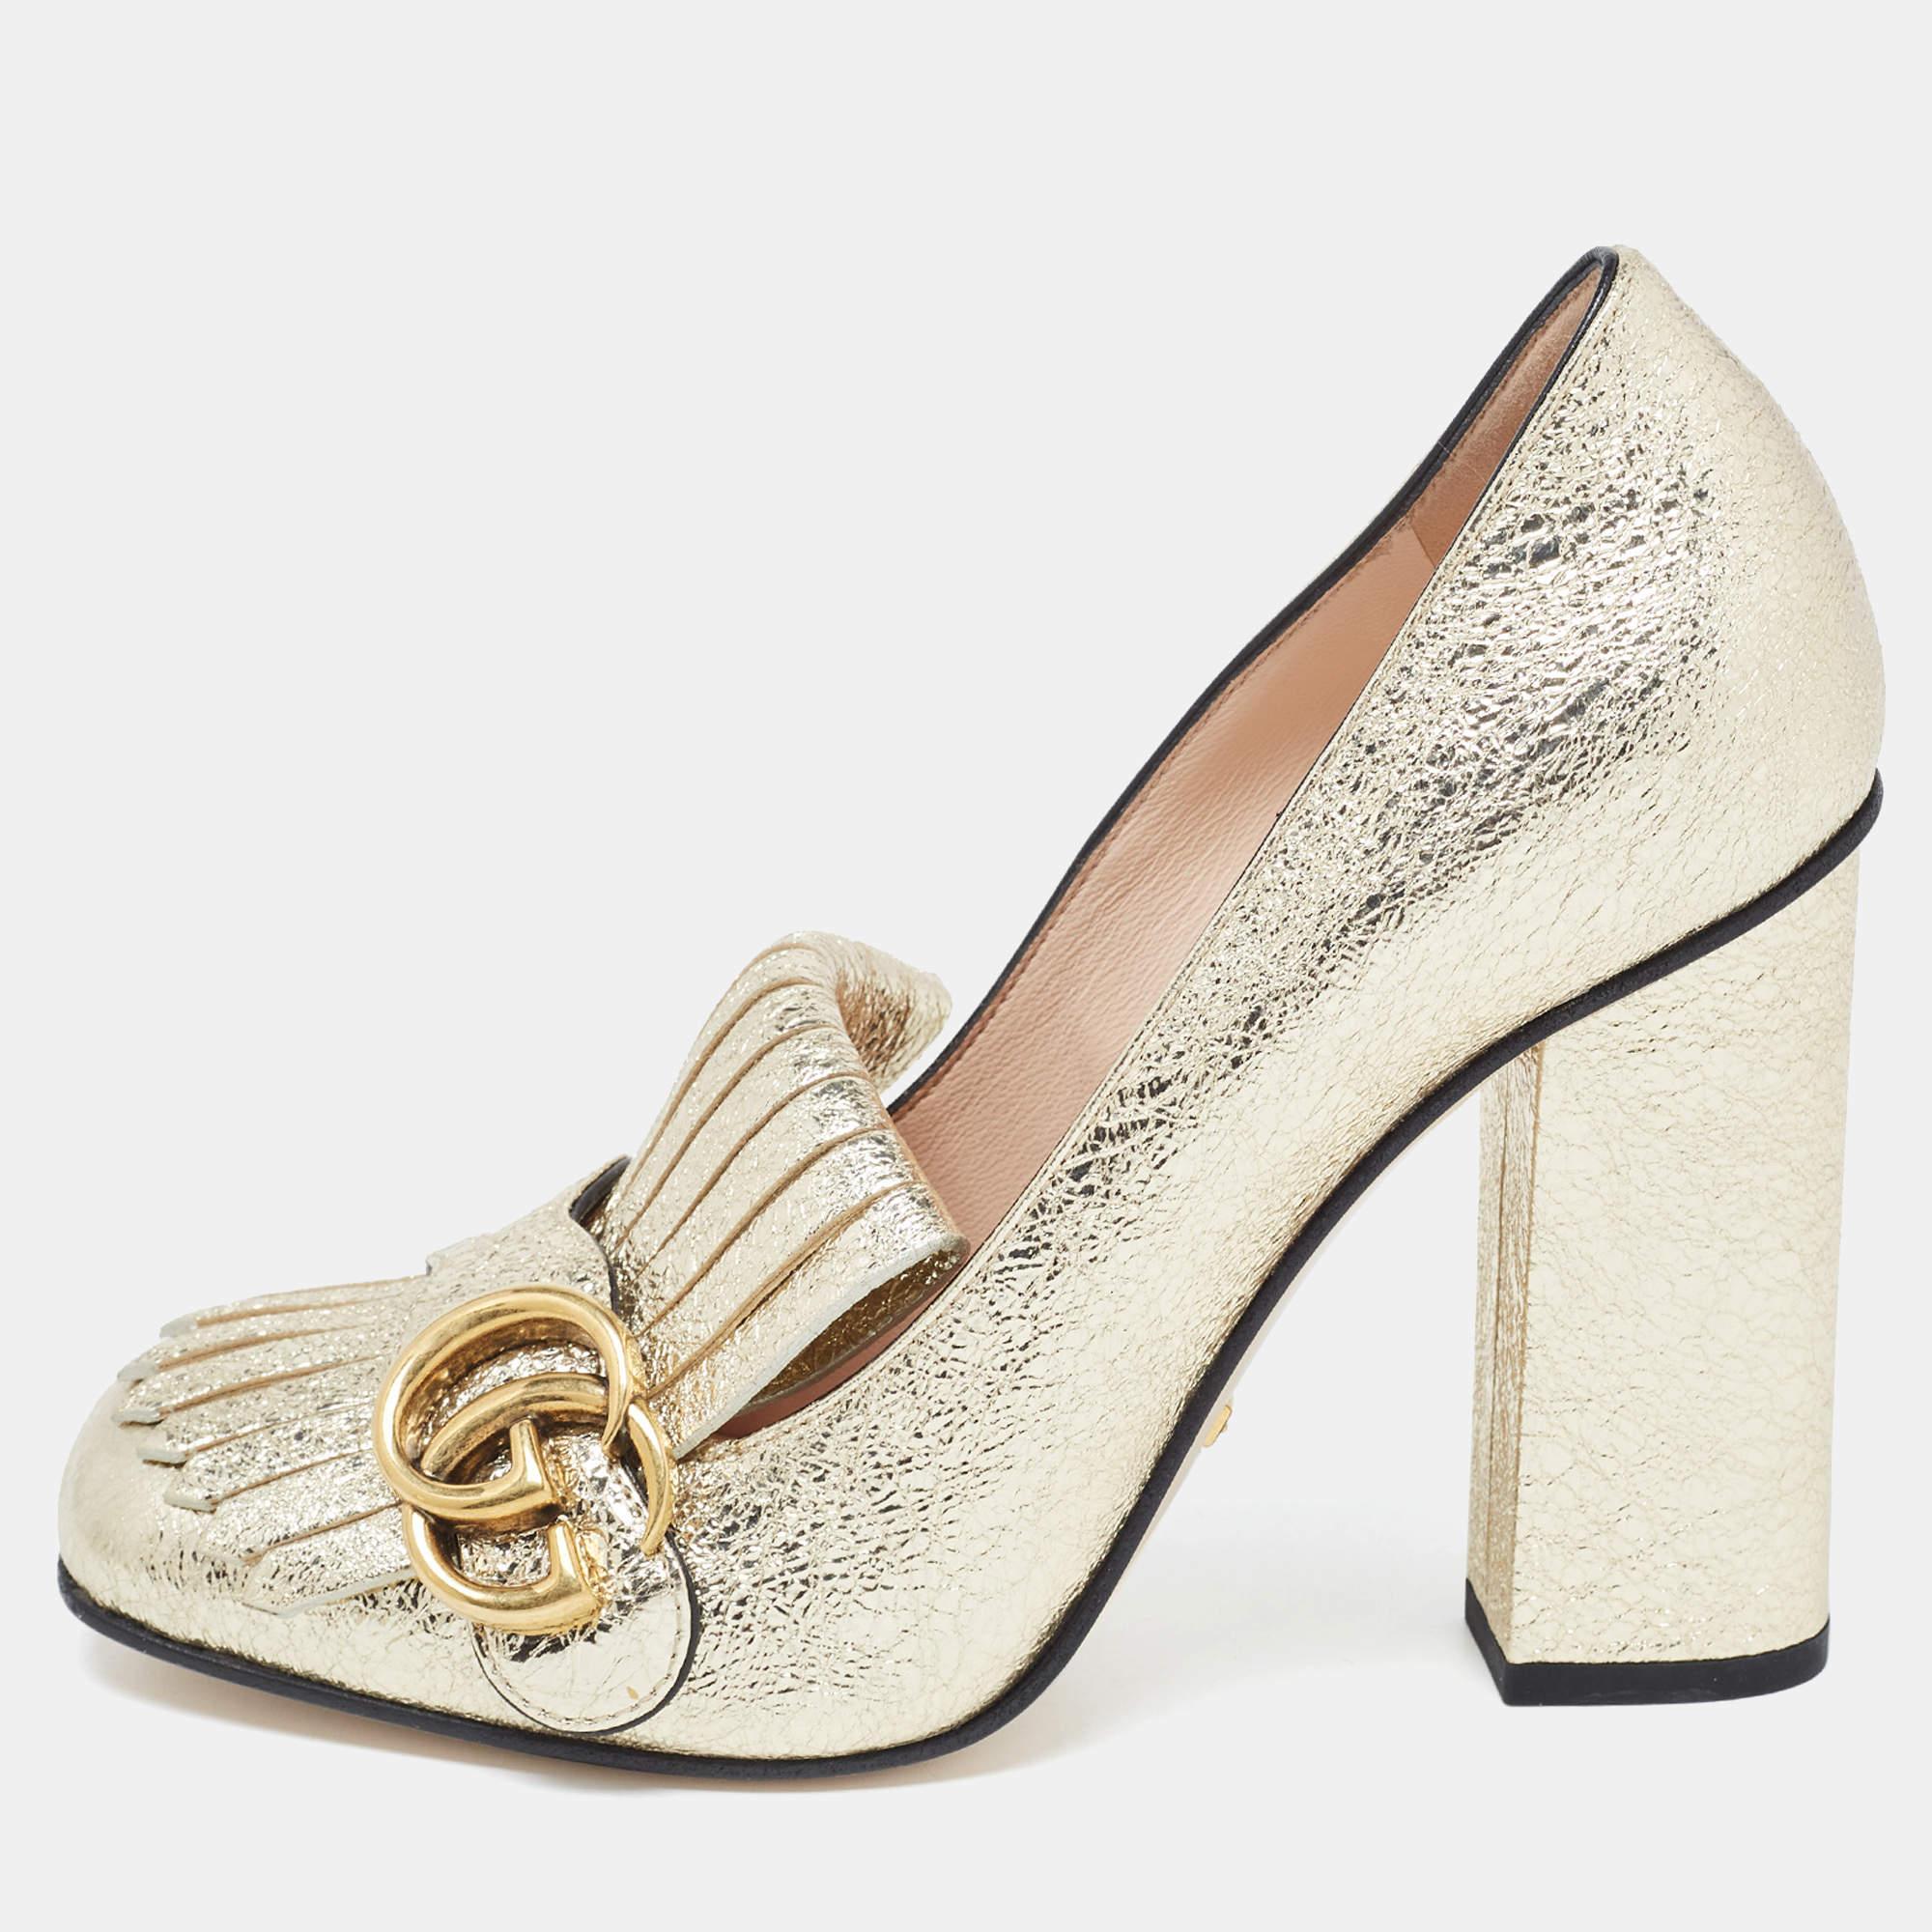 Absolutely on-trend and easy to flaunt, this pair of pumps by Gucci is a true stunner. They've been crafted from metallic gold foil leather and styled with folded fringes and the brand's signature GG on the uppers. Square toes and a set of block